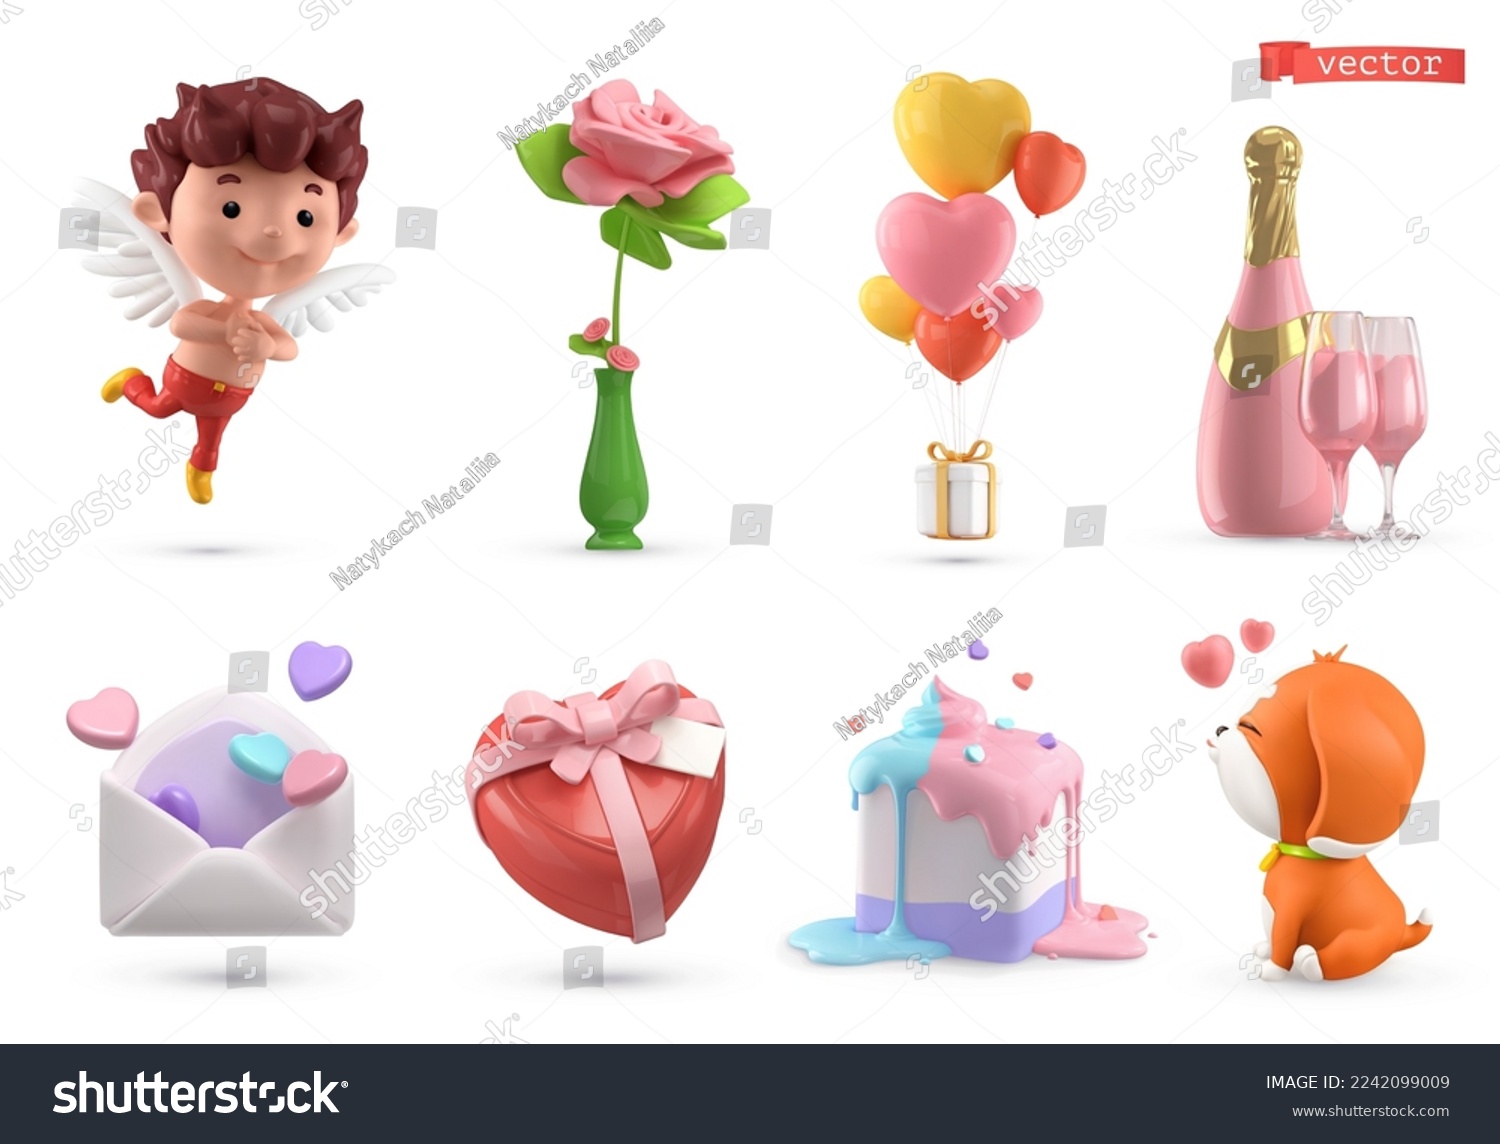 SVG of Valentine's day 3d vector cartoon icon set. Cupid, rose, balloons, pink champagne, letter and hearts, gift, cake, puppy svg